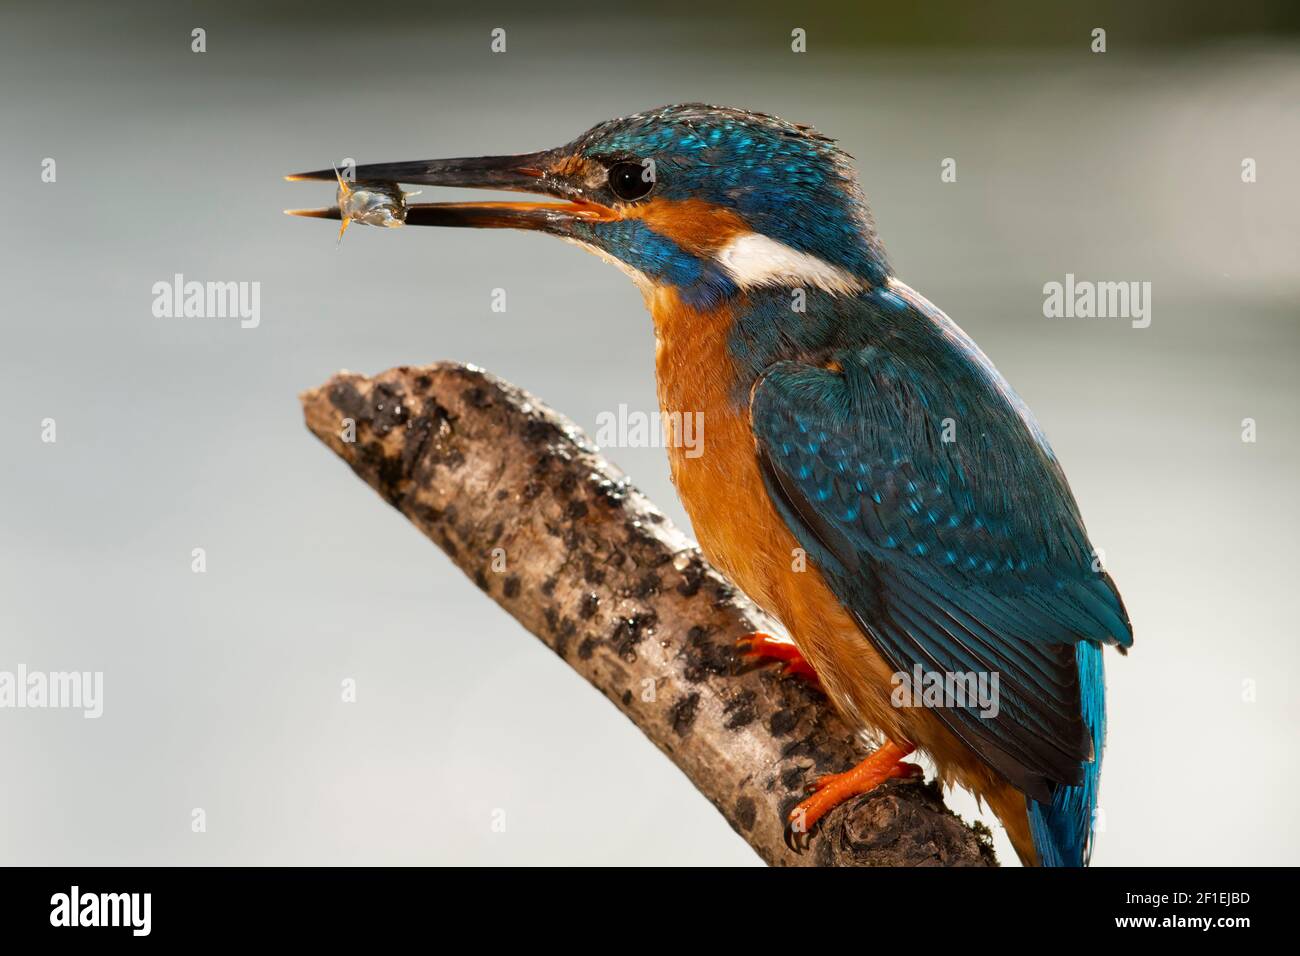 European kingfisher (Alcedo atthis), adult male, perching on stick with three-spined stickleback (Gasterosteus aculeatus) fish, Somerset, UK. Stock Photo